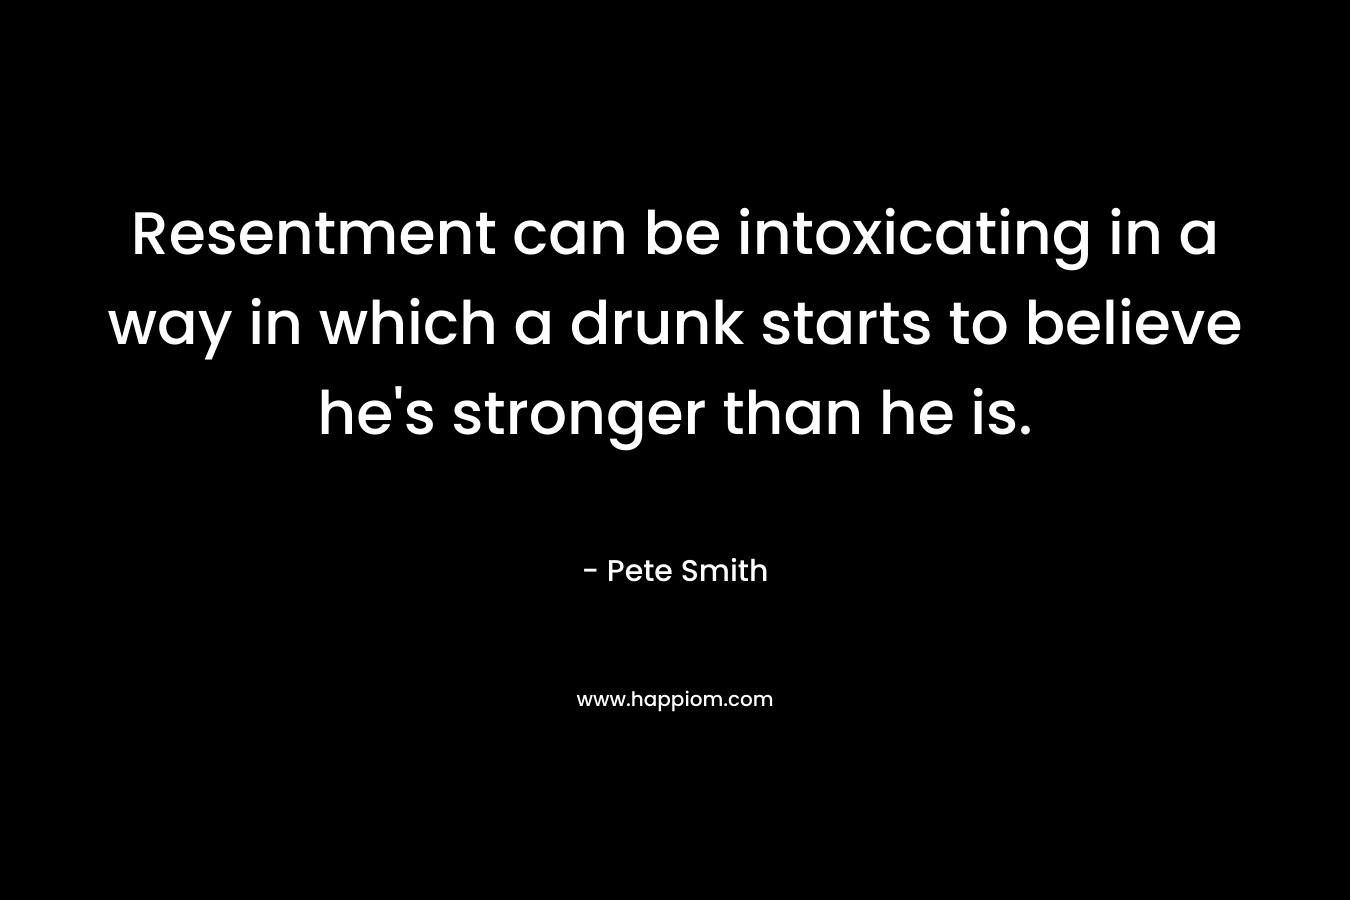 Resentment can be intoxicating in a way in which a drunk starts to believe he's stronger than he is.